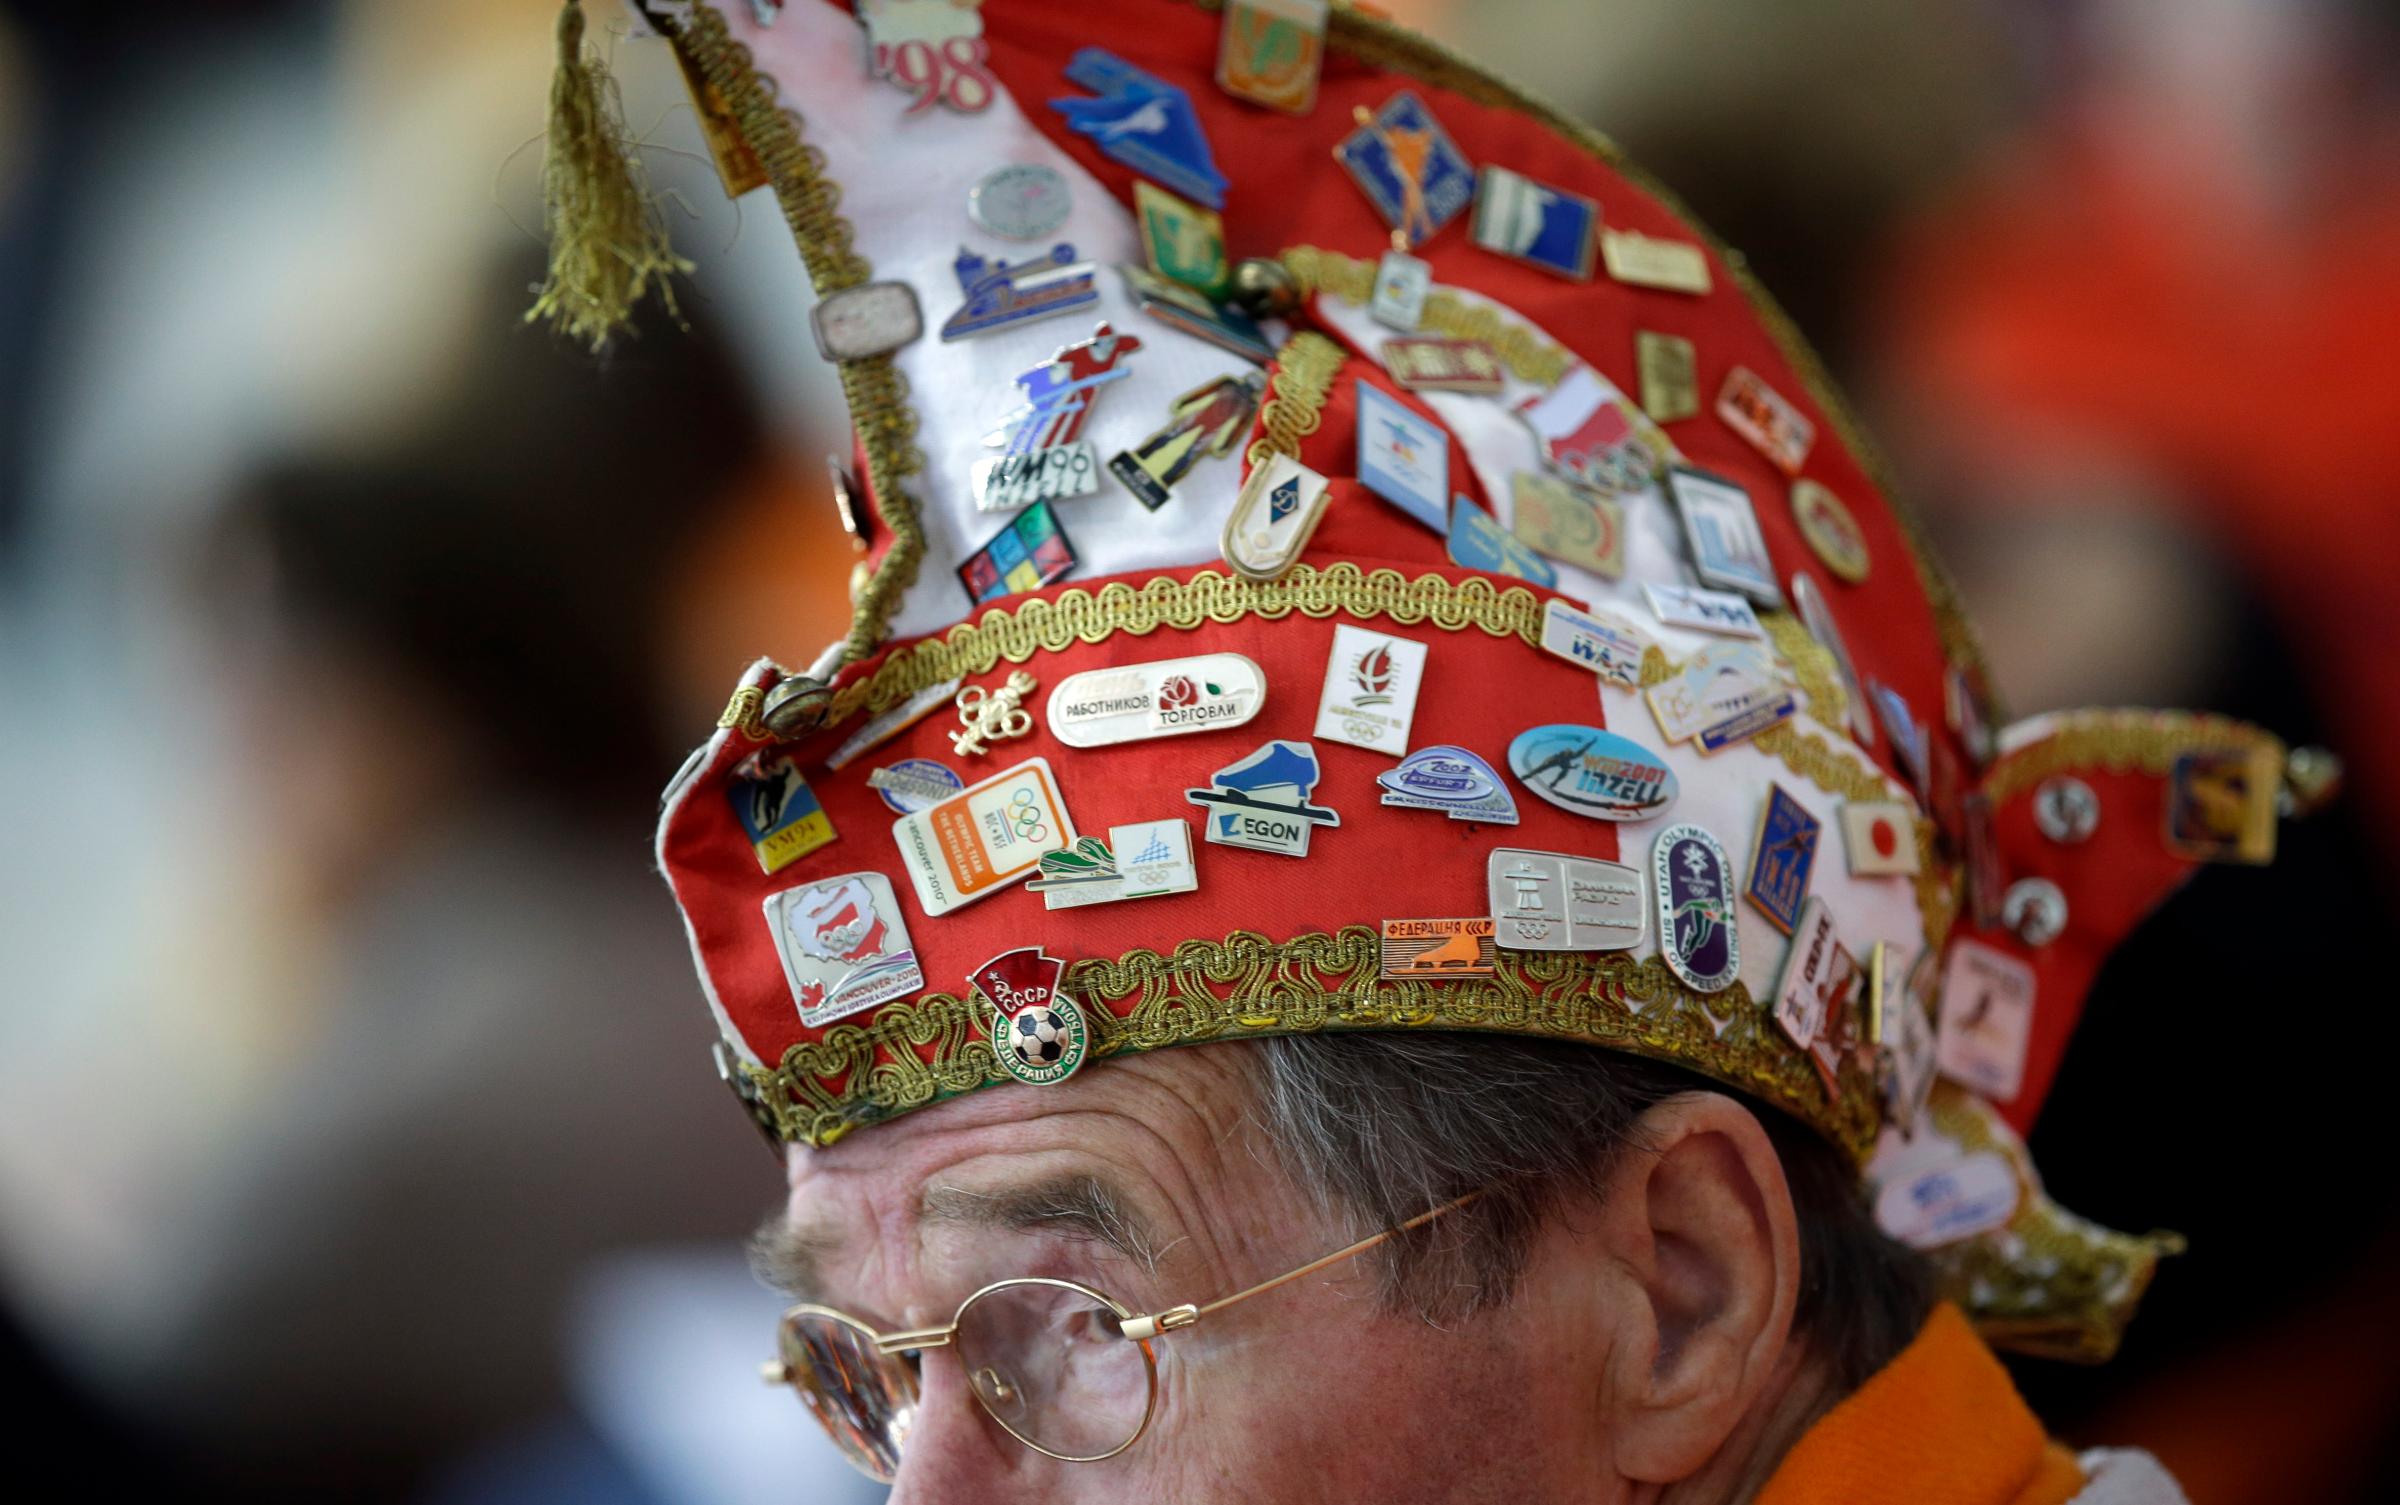 A Dutch skating fan, his hat filled with Olympic pins, watches the women's 1,000-meter speedskating race during the 2014 Winter Olympics in Sochi, Russia, Feb. 13, 2014.